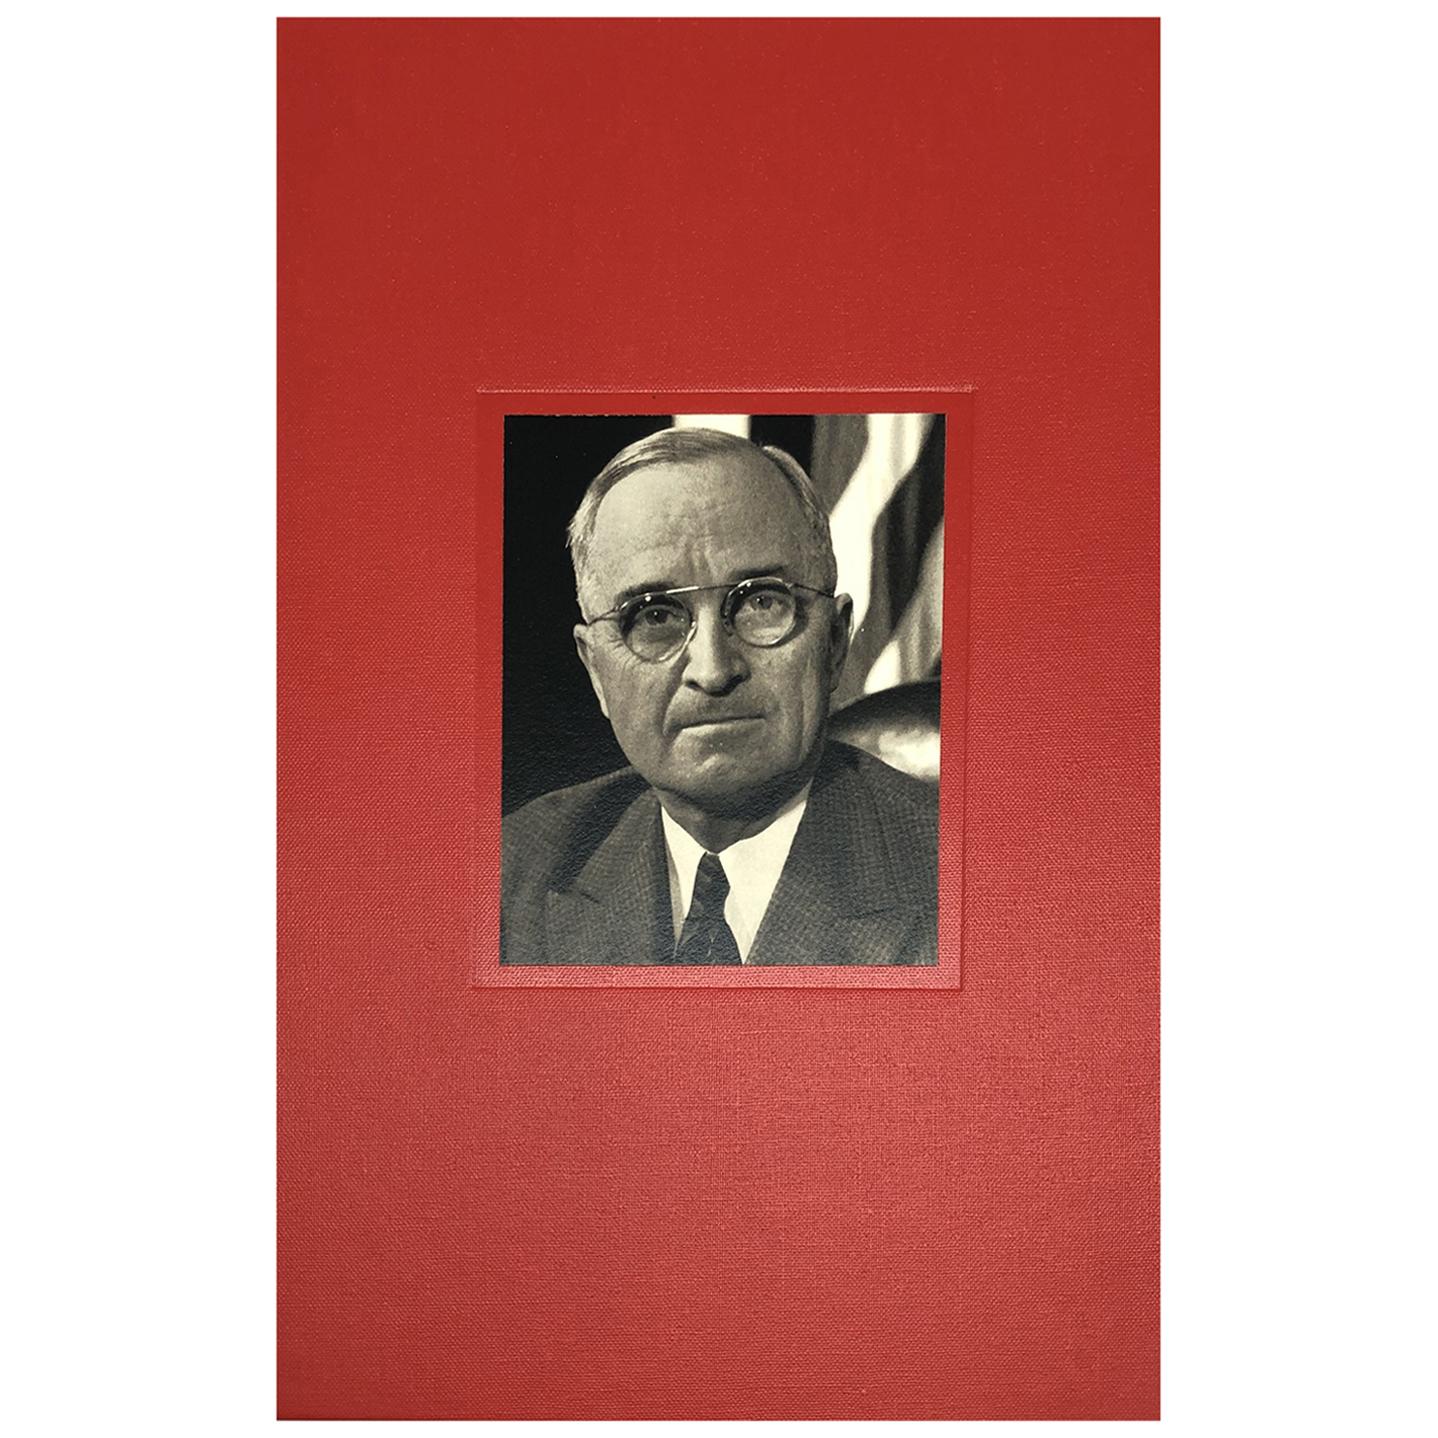 Truman, Harry. Memoirs by Harry S. Truman. New York: Doubleday & Company, 1955-1956. Both volumes signed and inscribed. First Editions with dust jackets. Two-volume set. Housed in archival slipcase.

Presented is Harry S. Truman’s two-volume set